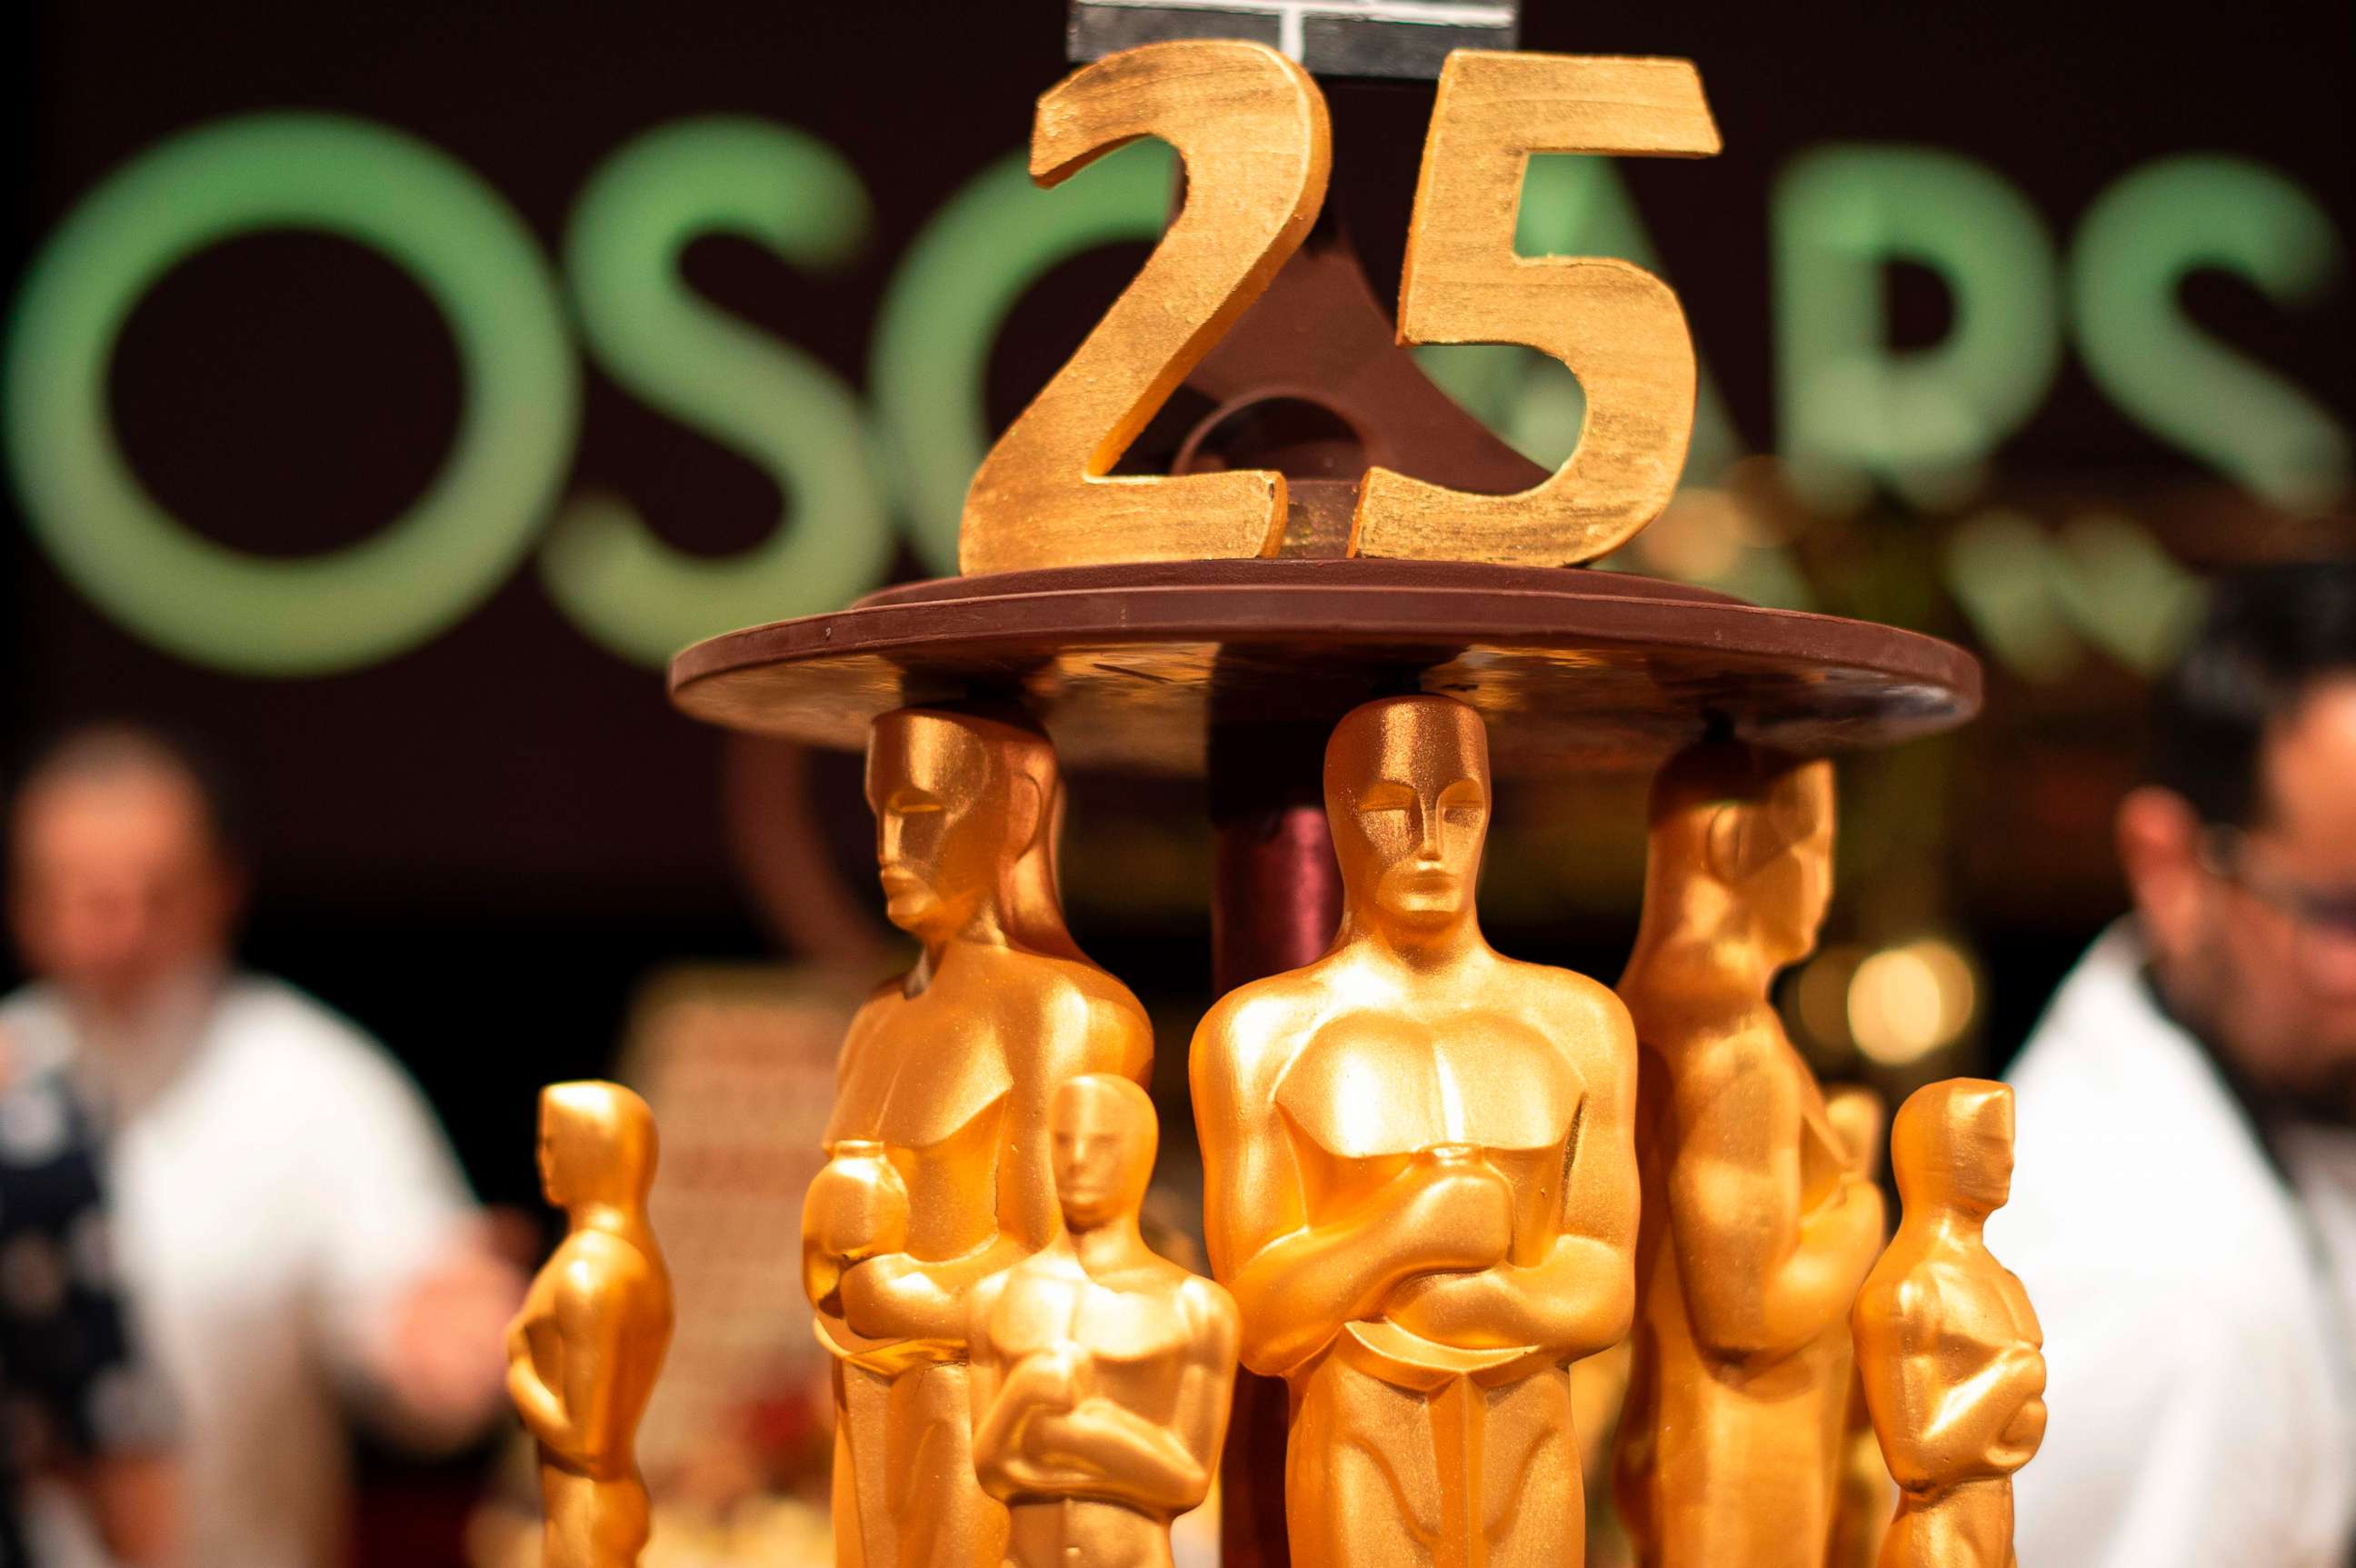 PHOTO: Confections by pastry chef Kamel Guechida are displayed during a preview for the Governors Ball during the 91st annual Academy Awards week in Hollywood, on Calif., Feb. 15, 2019.